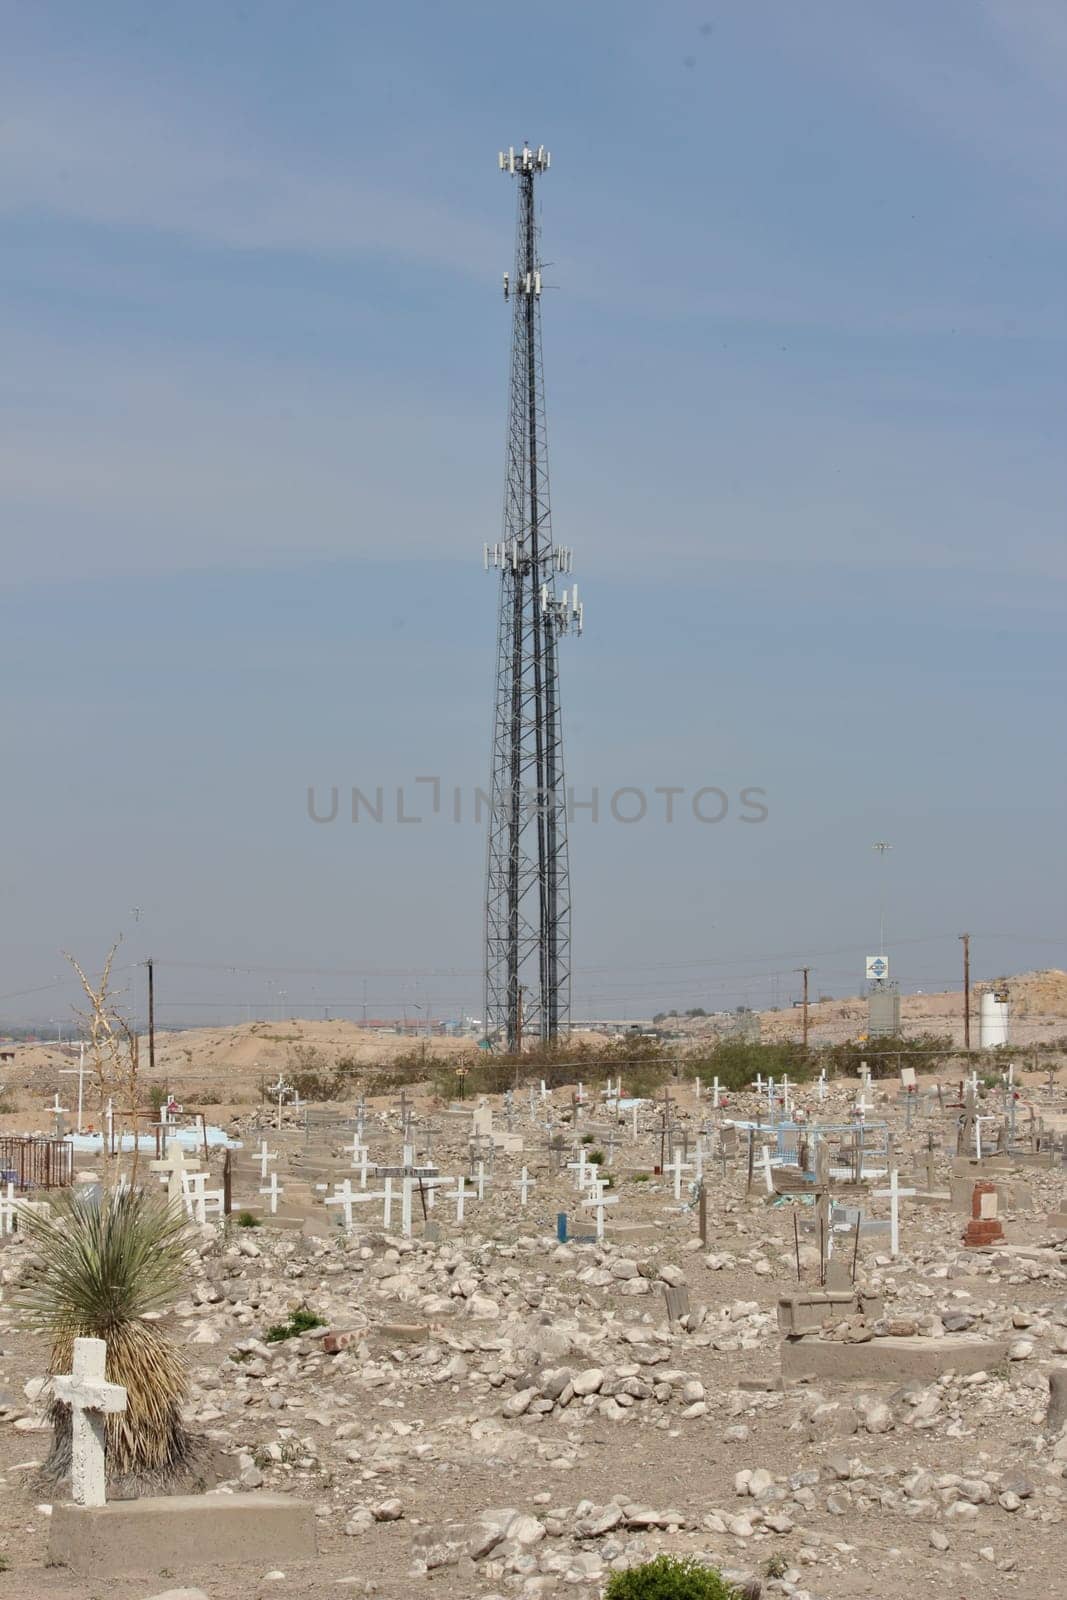 Transmission tower in the cemetery of a village, does 5G harm people.